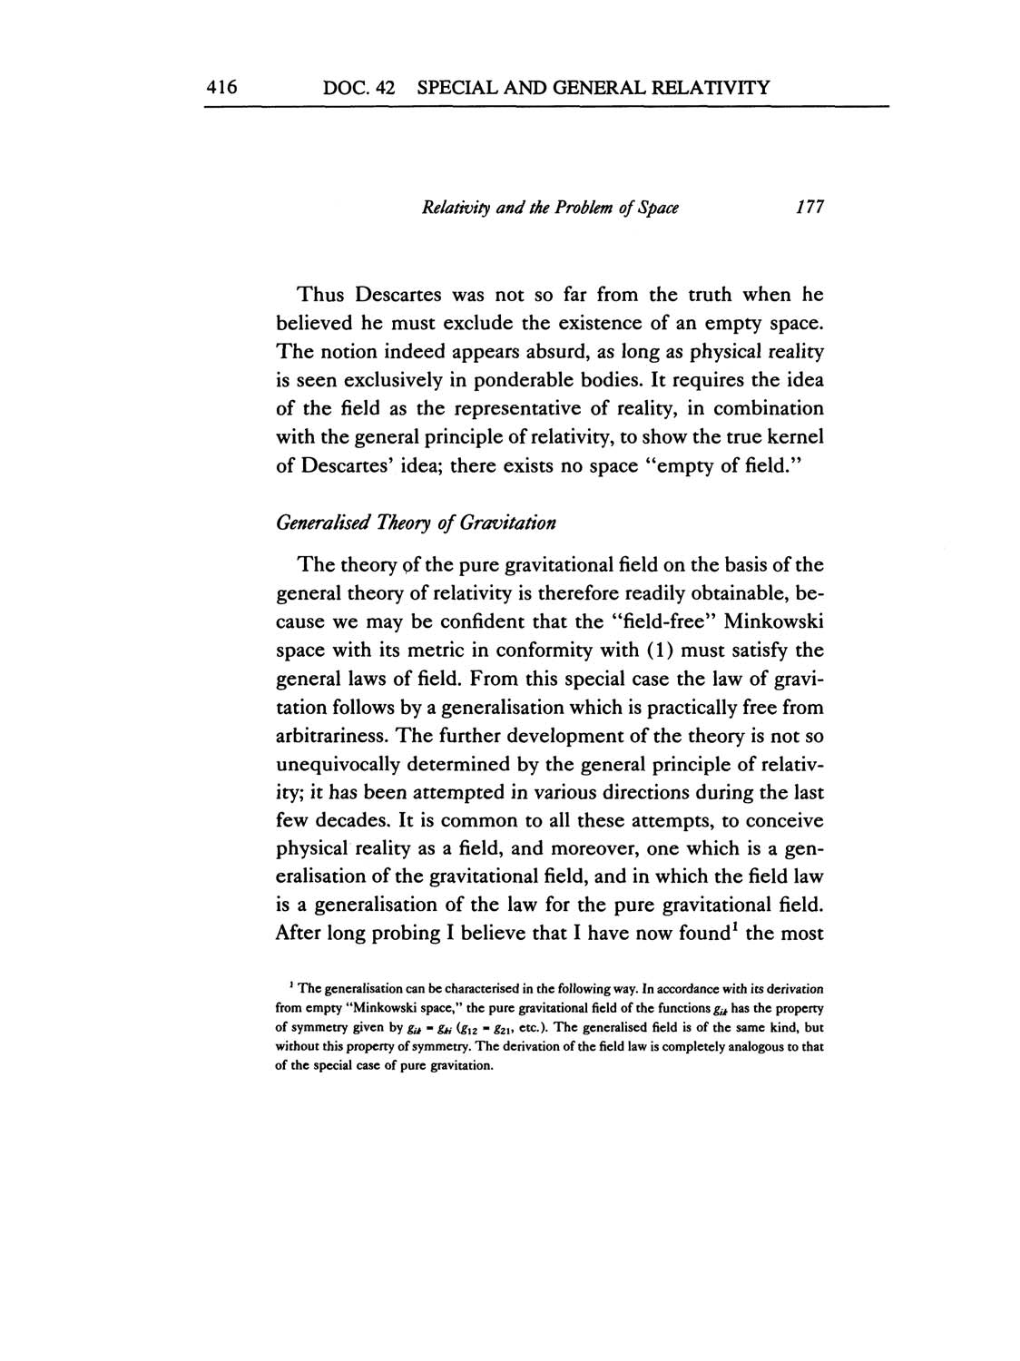 Volume 6: The Berlin Years: Writings, 1914-1917 (English translation supplement) page 416